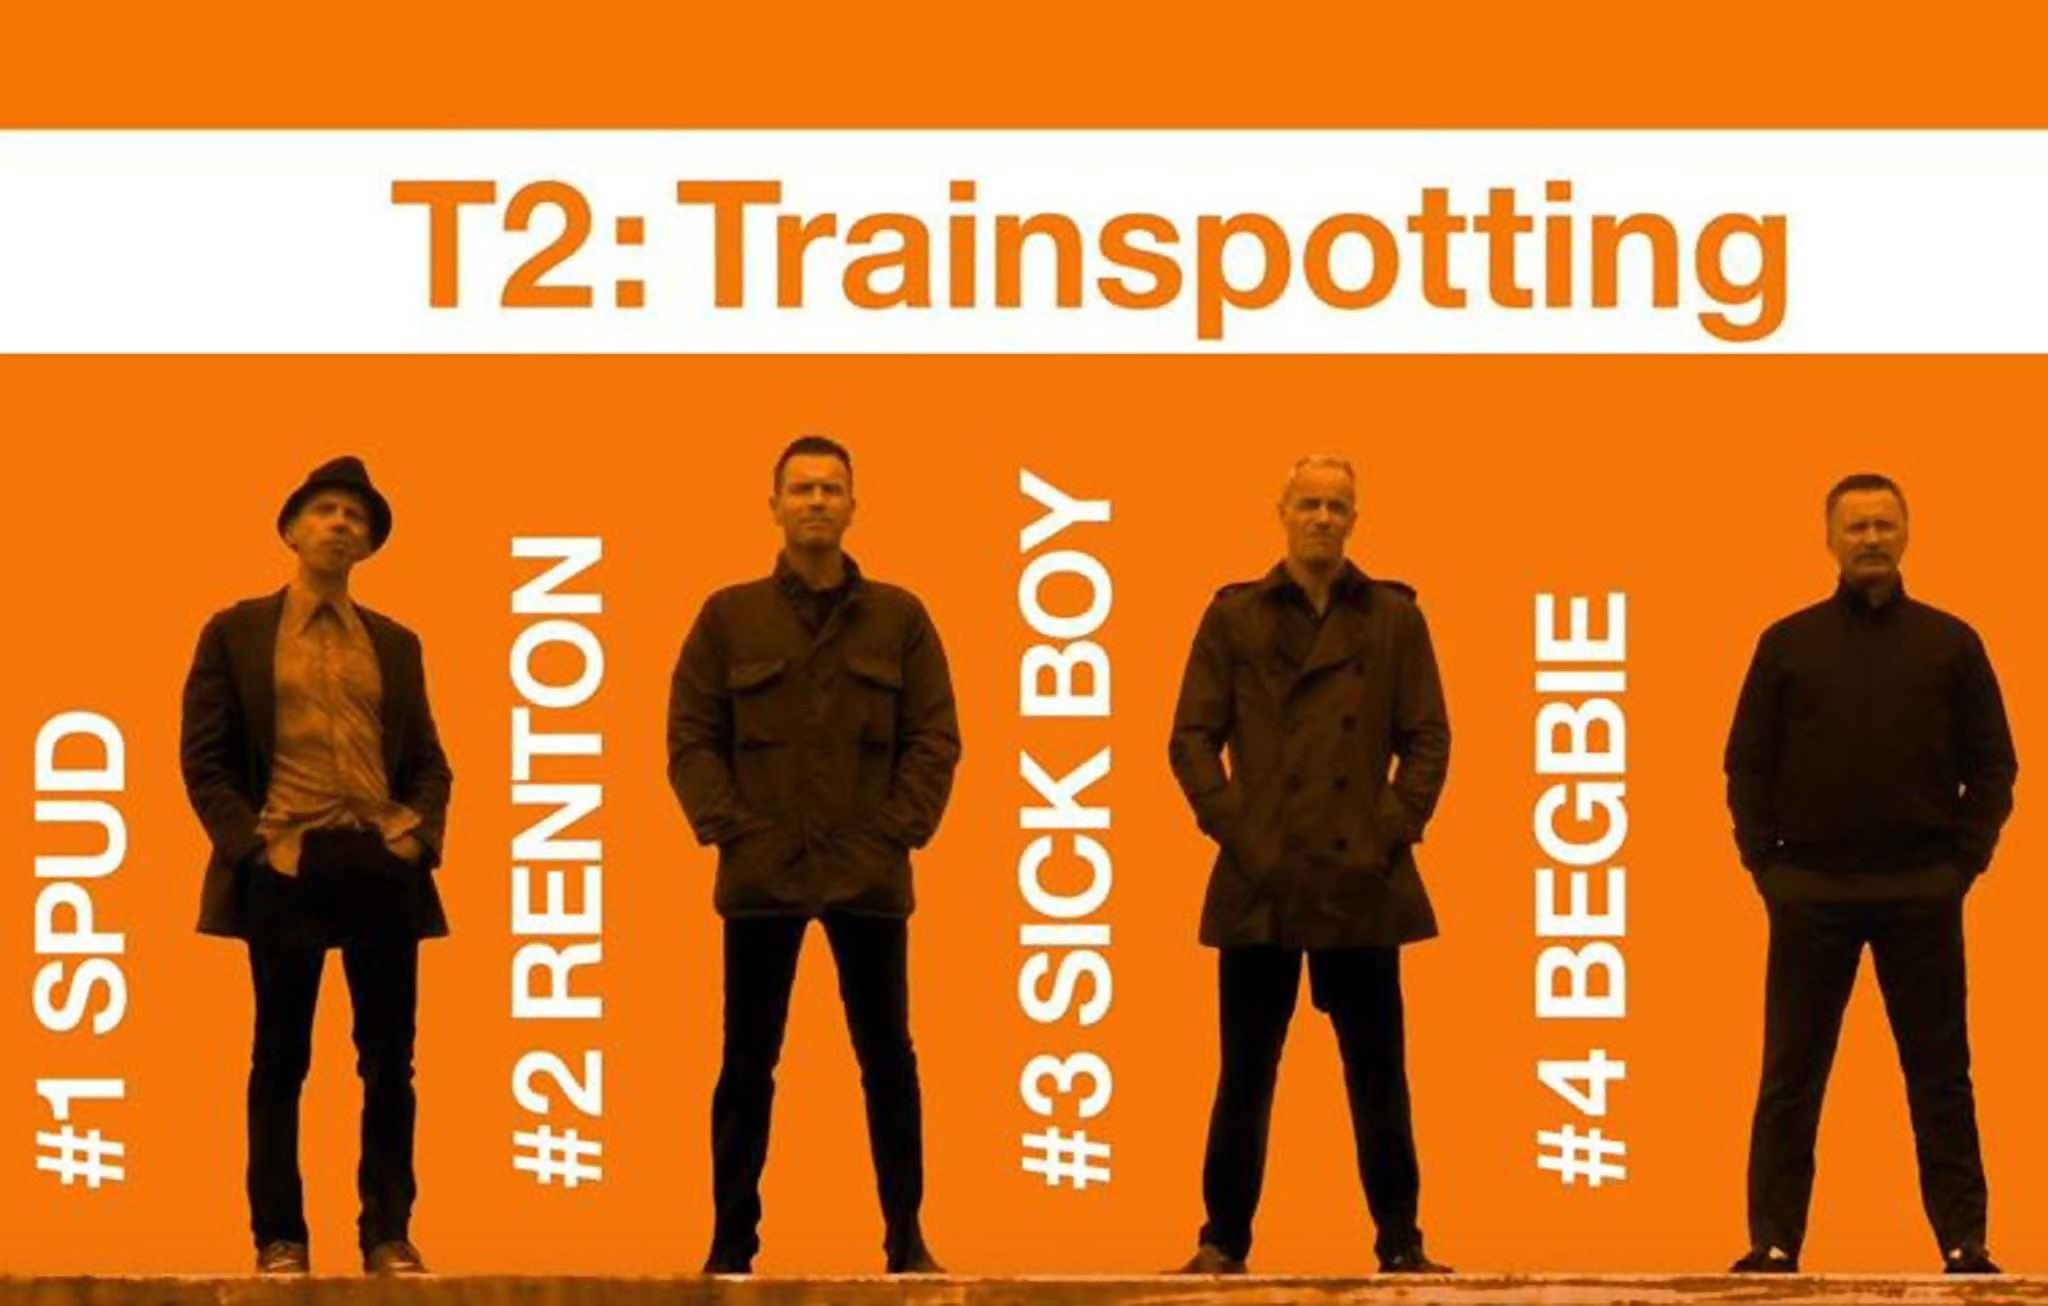 We've got the best T2 Trainspotting movie quotes right here for you, plus a few amazing quotes from the book! Check them out!